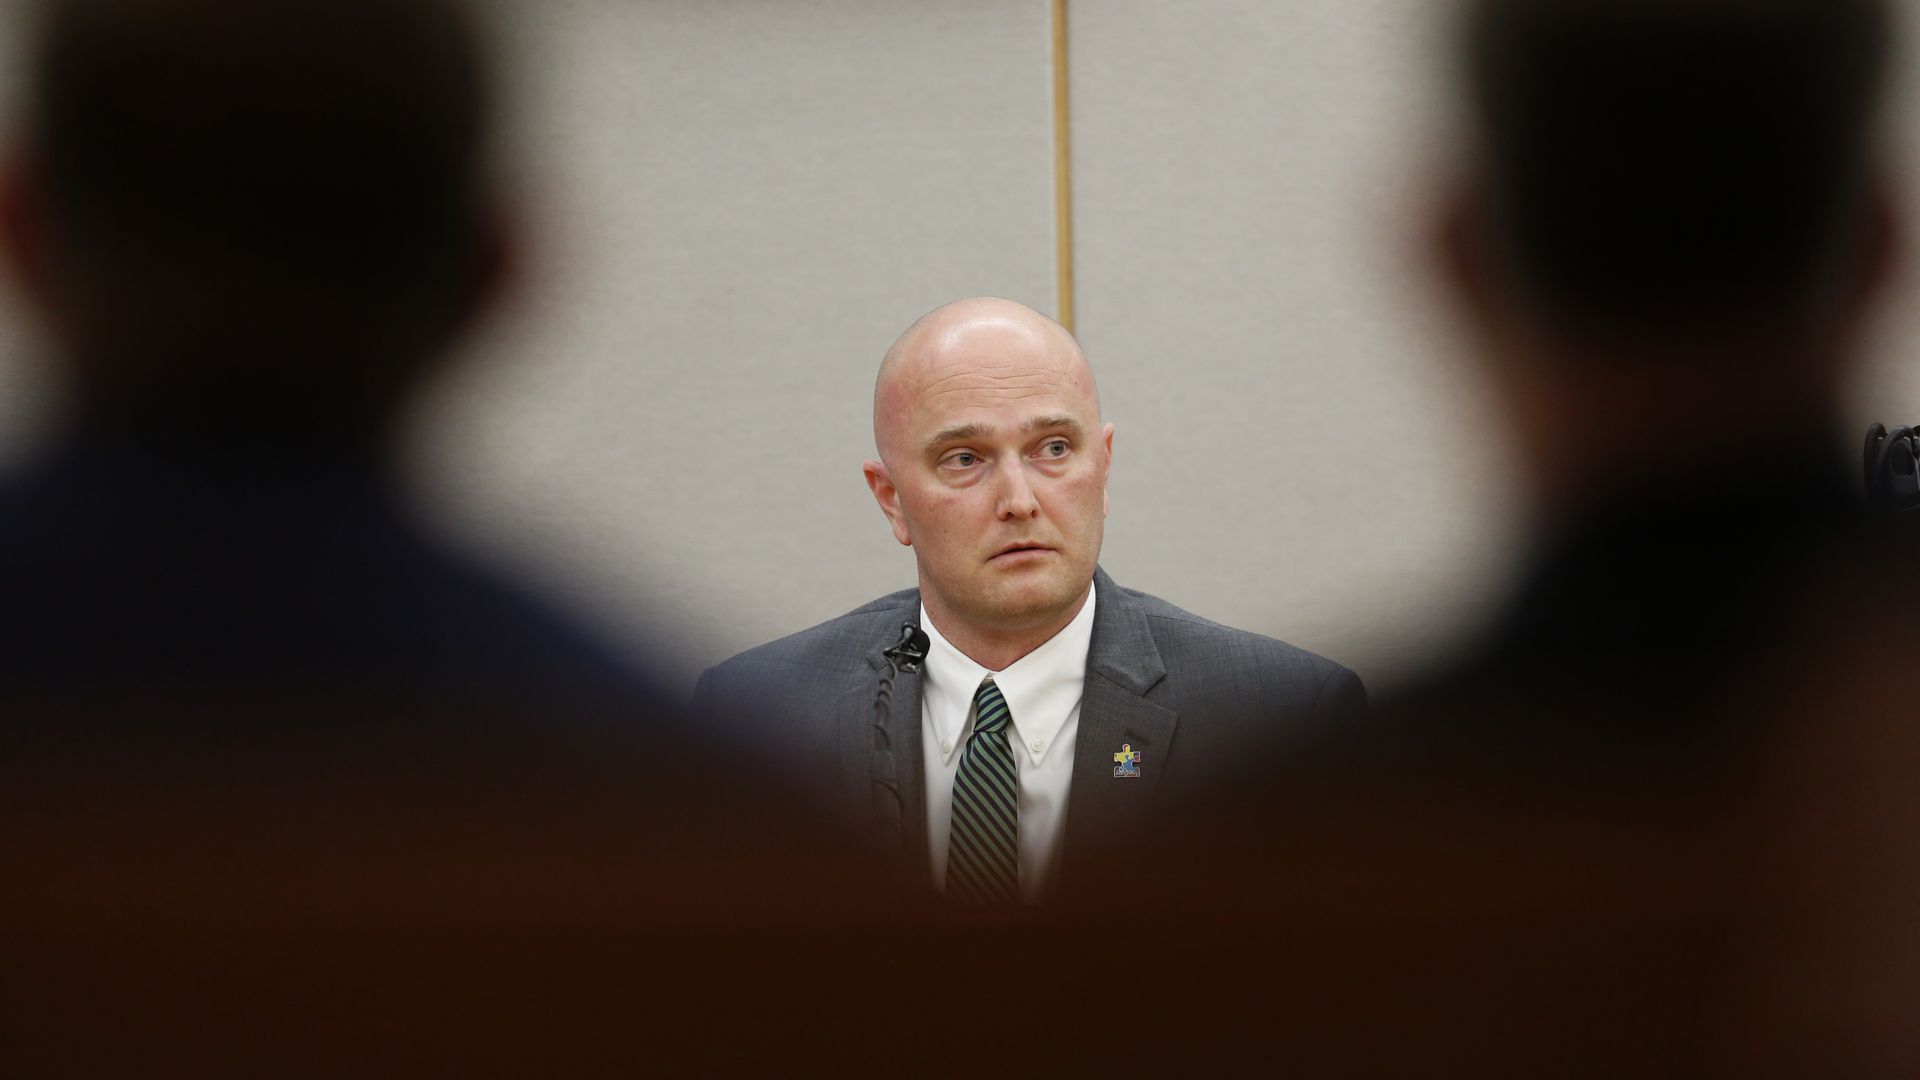 Fired Balch Springs police officer Roy Oliver during his trial at the Frank Crowley Courts Building in Dallas. Photo: Rose Baca-Pool/Getty Images